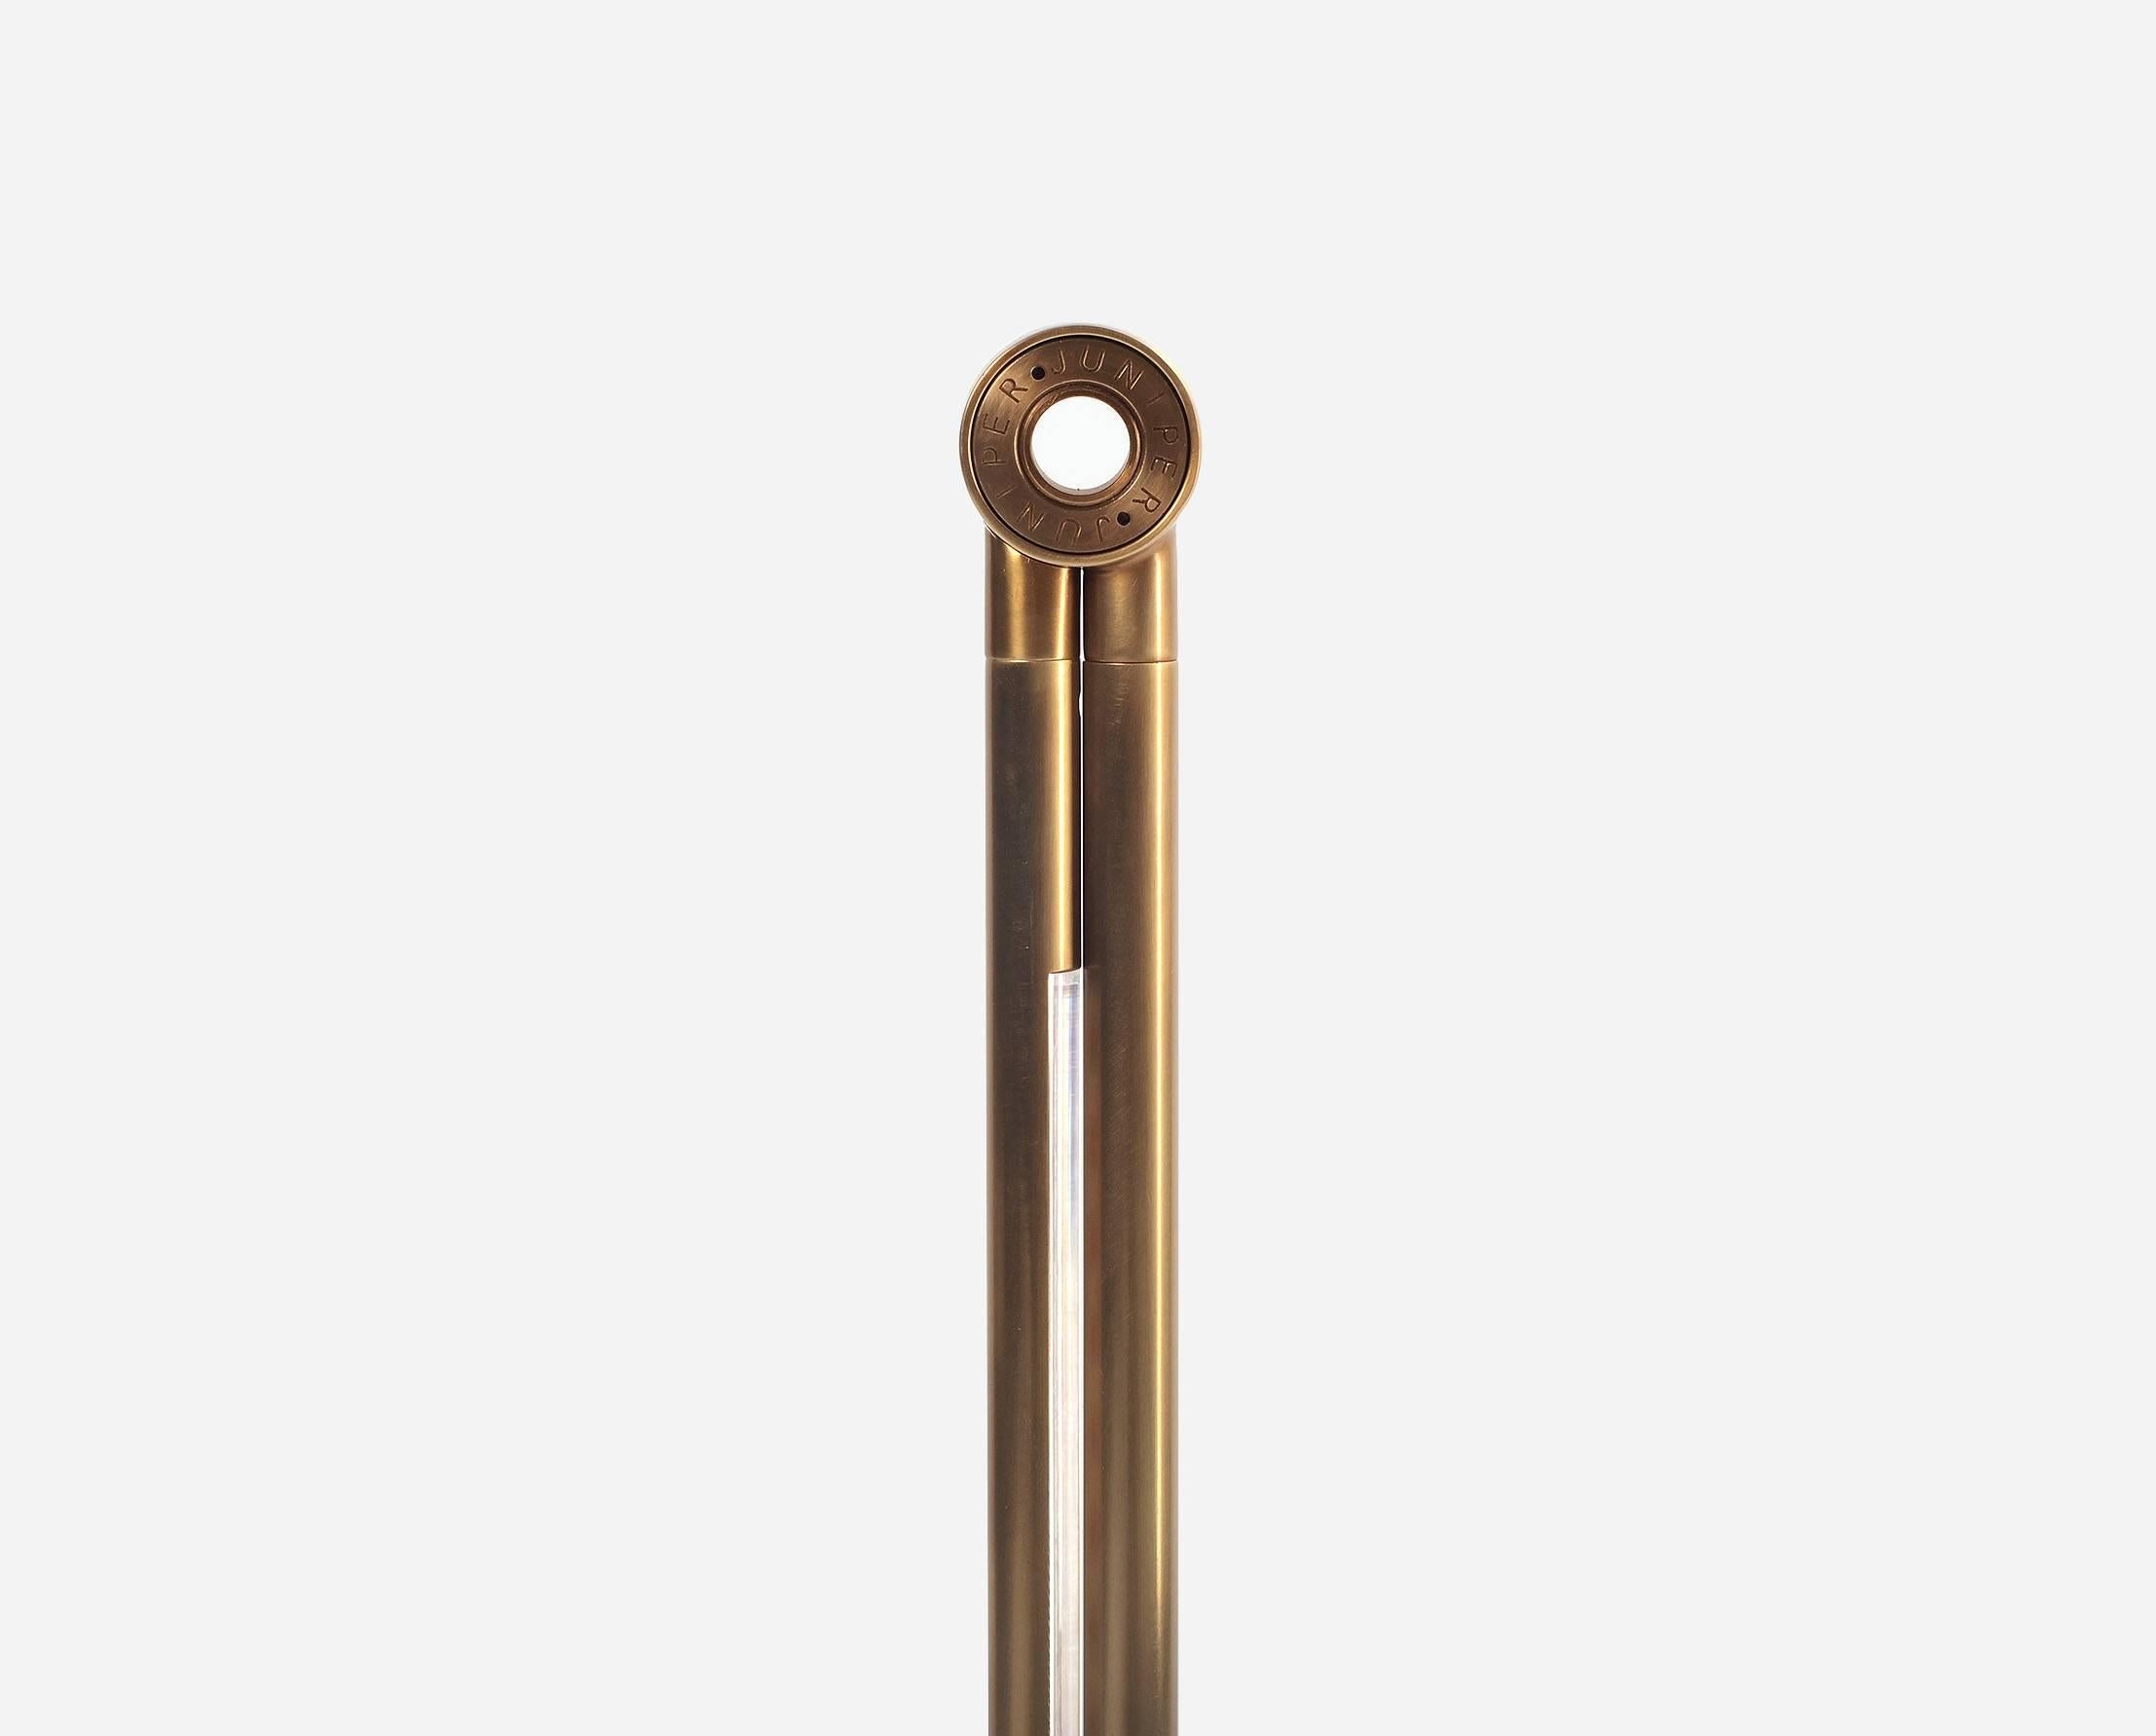 It’s thin profile is contemporary, while brass details and tubing combined with a cast iron base create a timeless and friendly feel. The lamp’s slender arms stretch across a work surface without taking it over and the mounted ball joint and